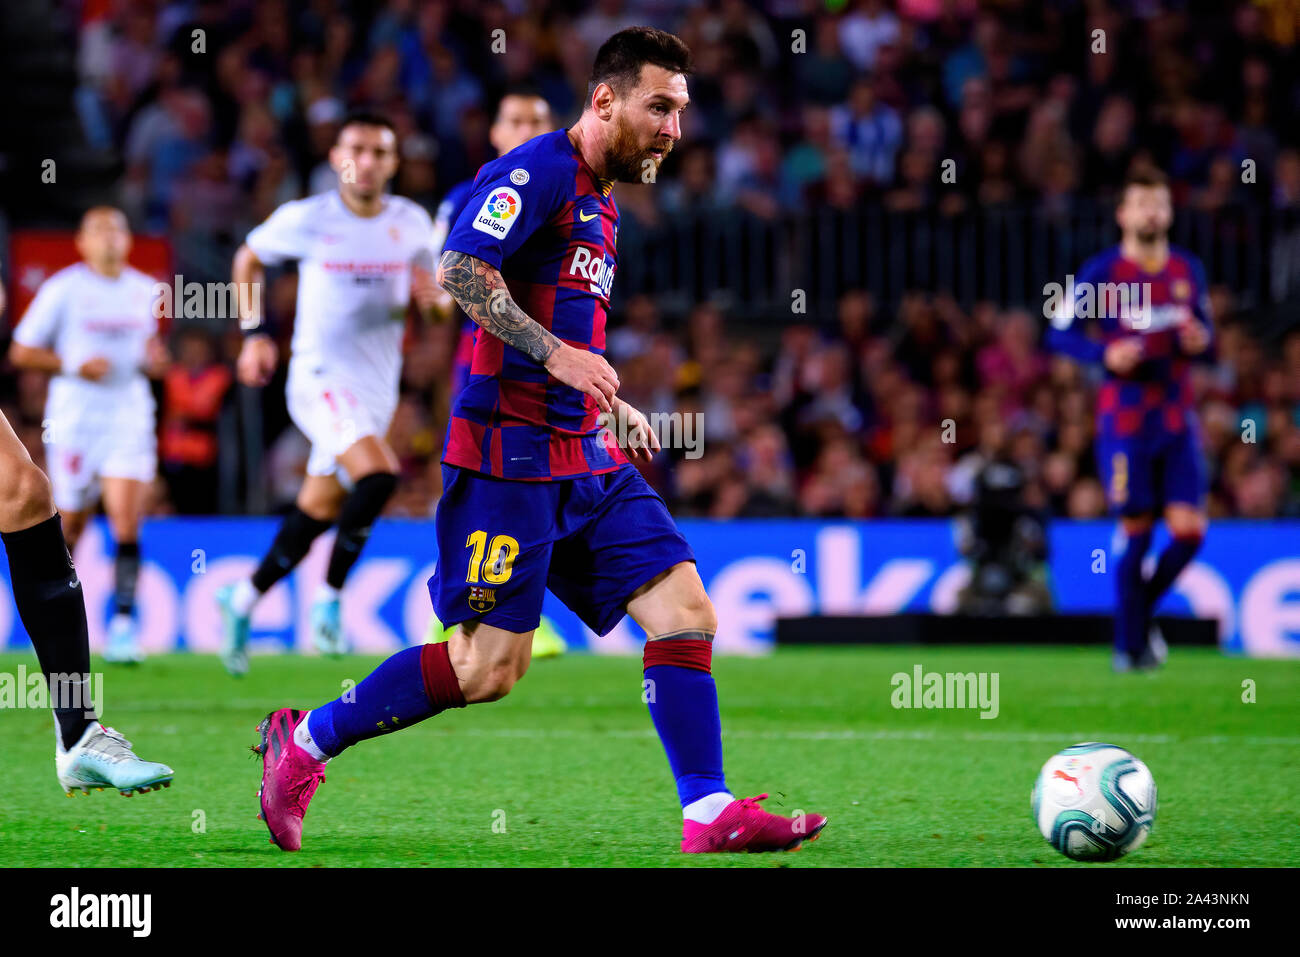 BARCELONA - OCT 6: Lionel Messi plays at the La Liga match between FC Barcelona and Sevilla FC at the Camp Nou Stadium on October 6, 2019 in Barcelona Stock Photo